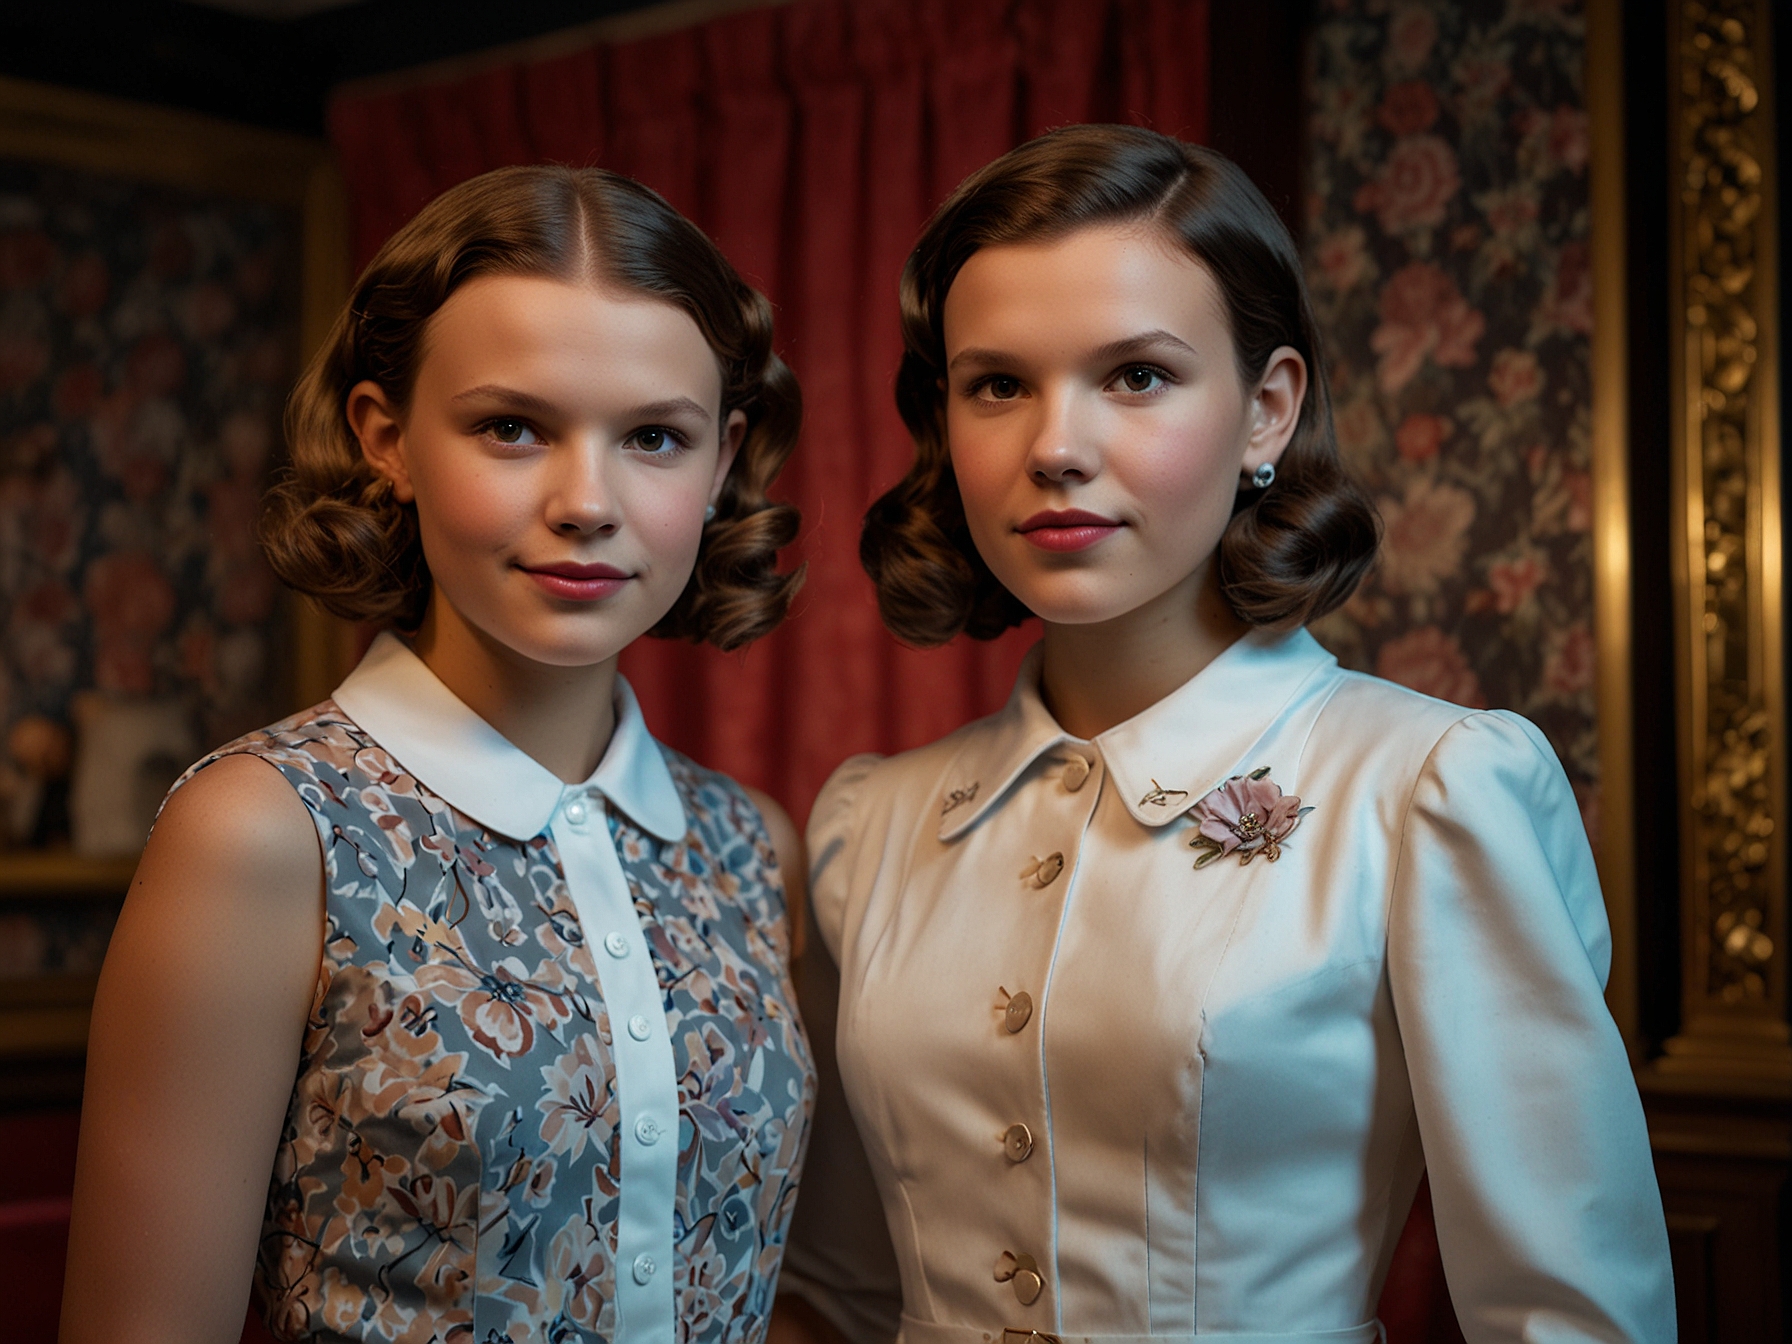 Millie Bobby Brown poses next to her lifelike wax figure of Enola Holmes at Madame Tussauds, showcasing the intricate detail and craftsmanship that went into creating the figure.